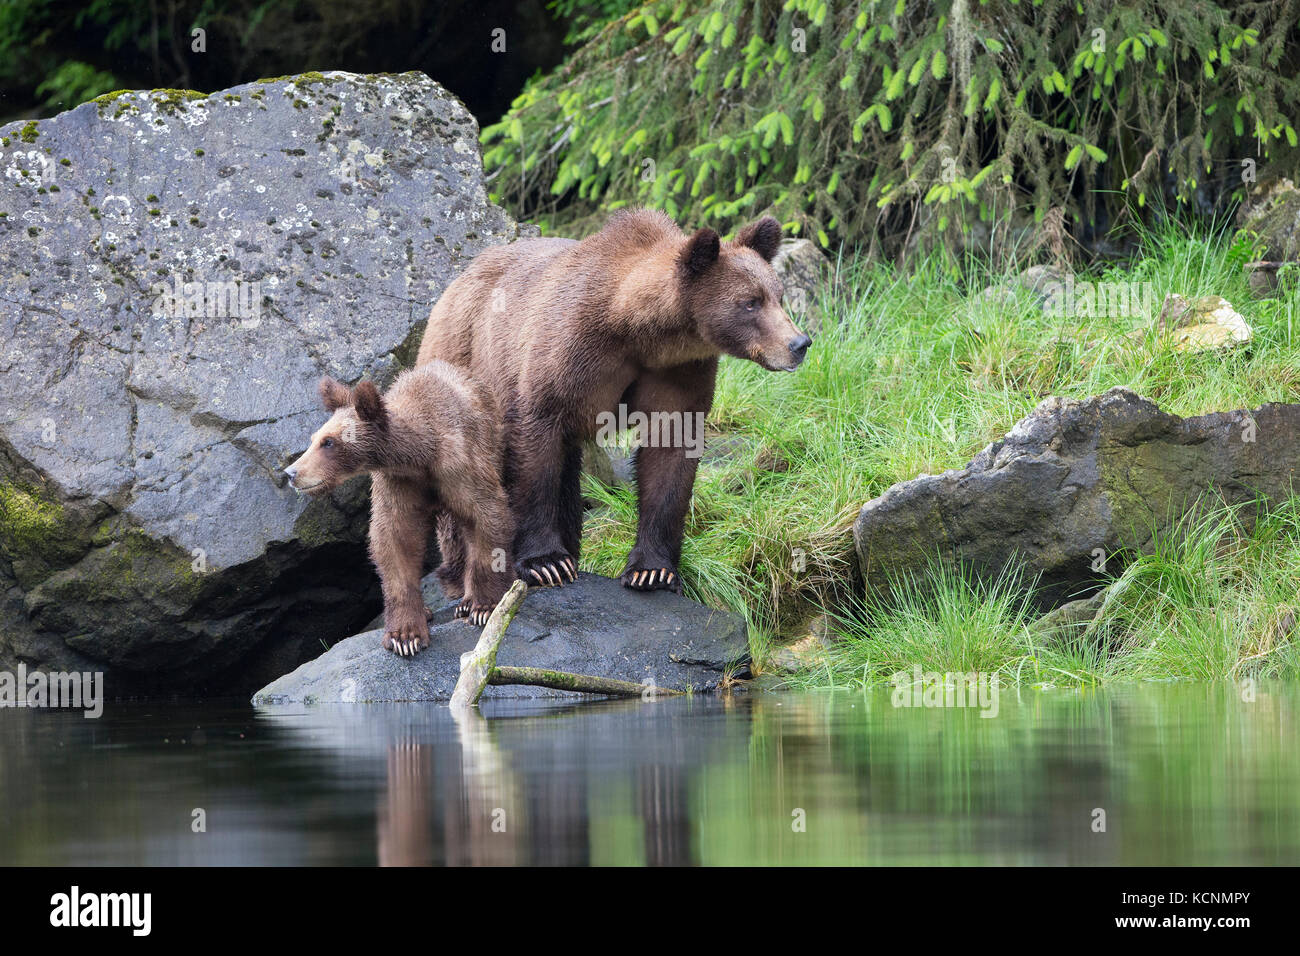 Grizzly bear (Ursus arctos horribilis), female and yearling cub, Khutzeymateen Grizzly Bear Sanctuary, British Columbia, Canada. Stock Photo